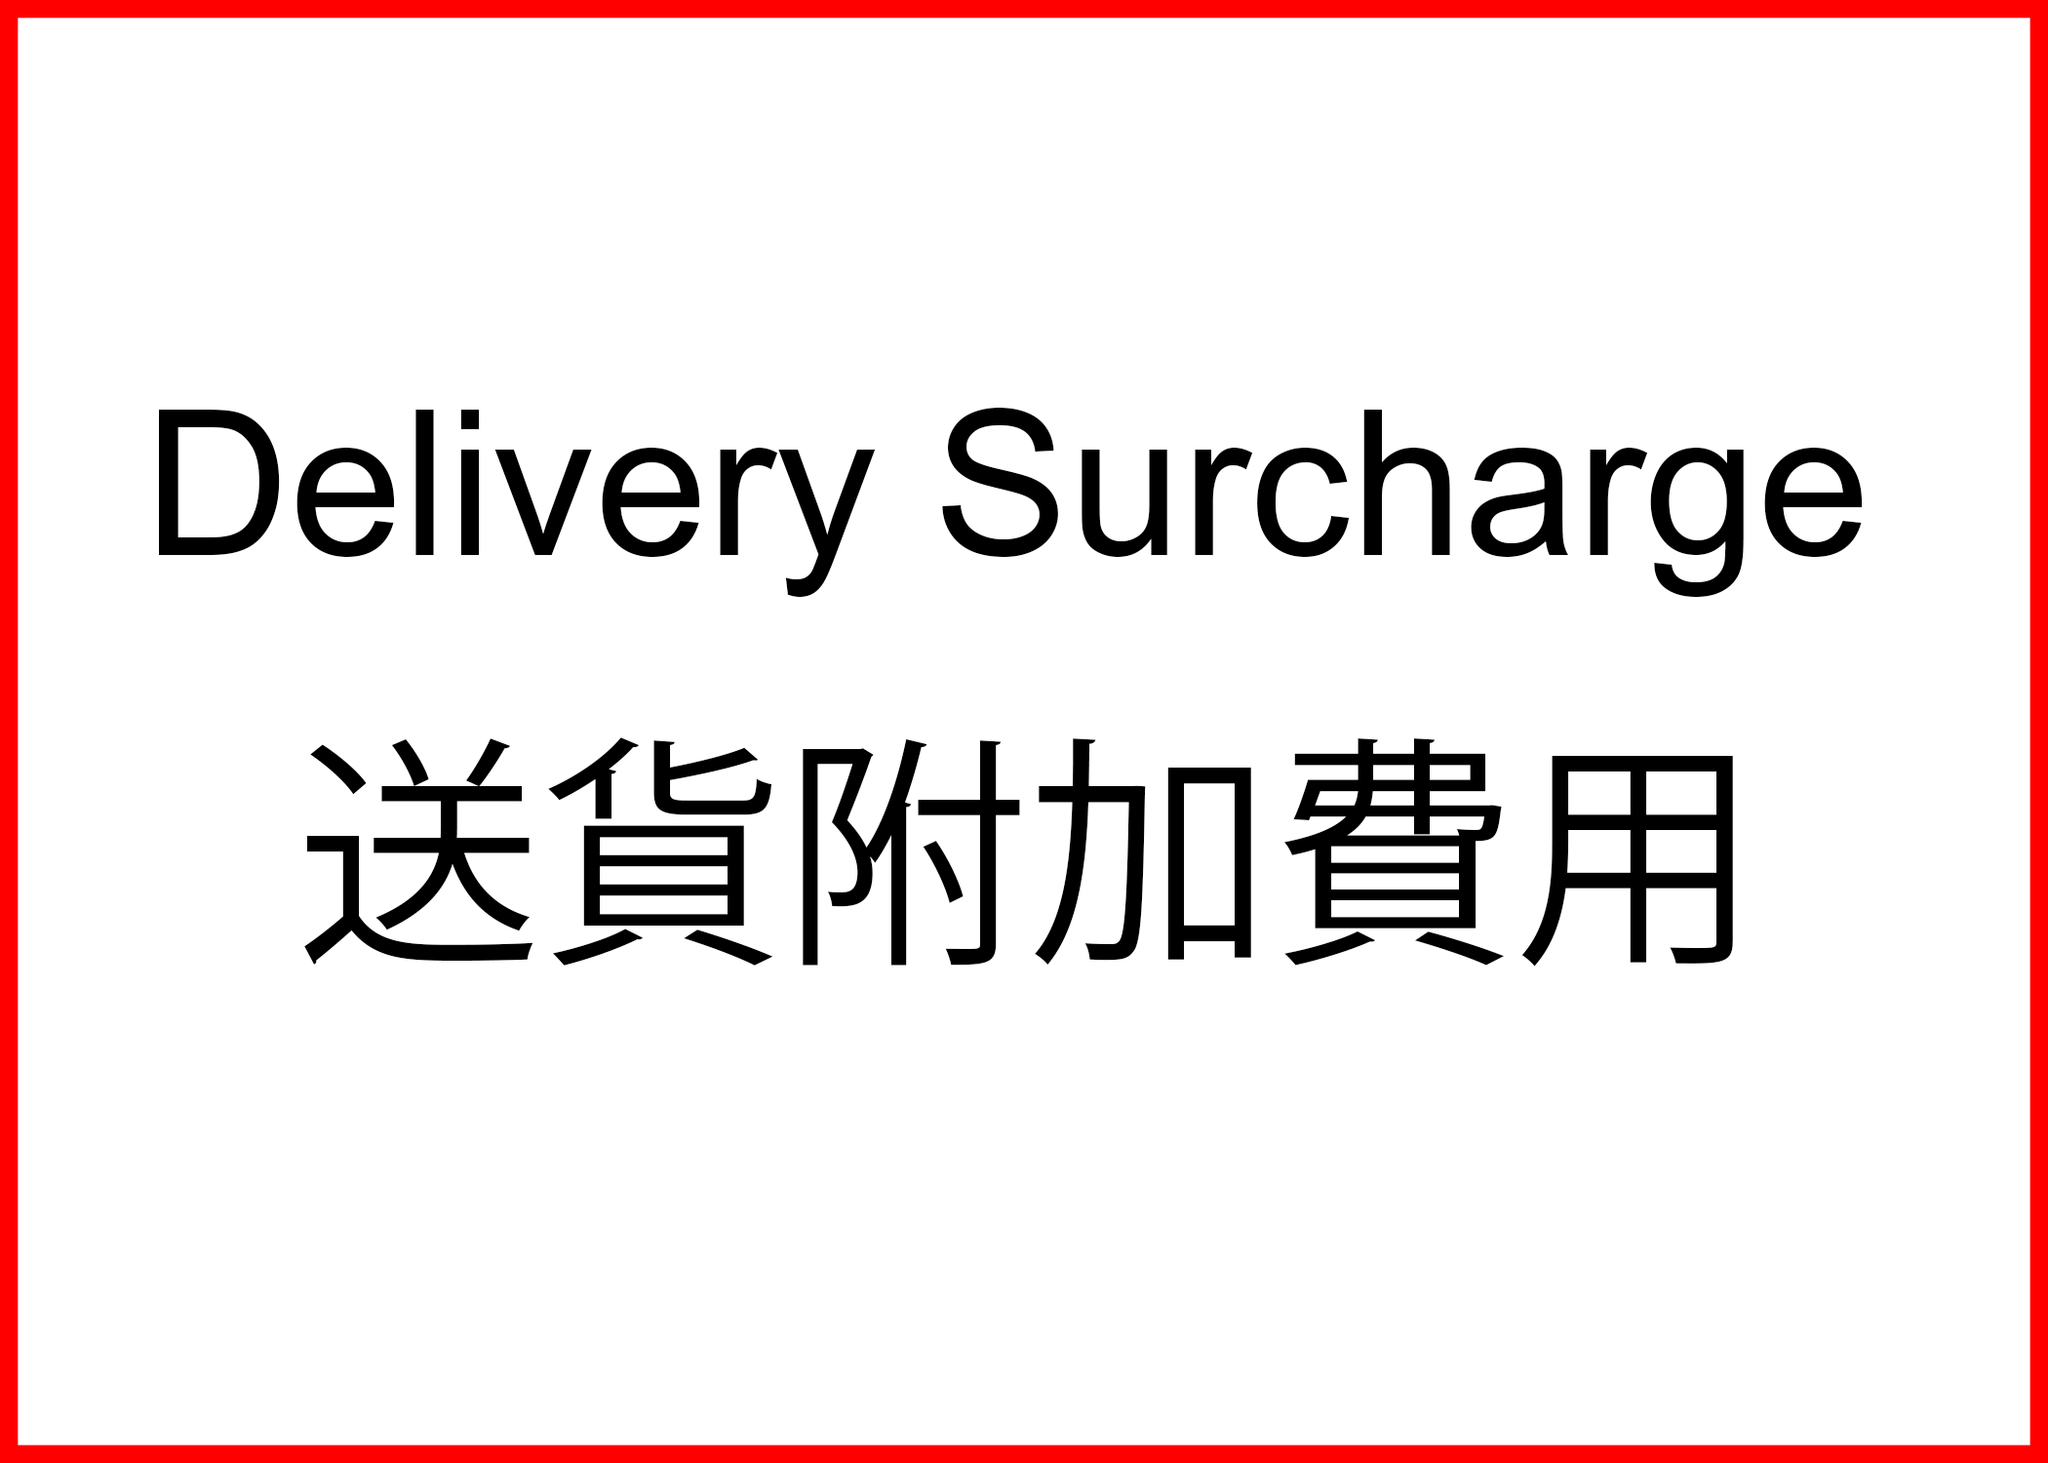 Delivery Surcharge